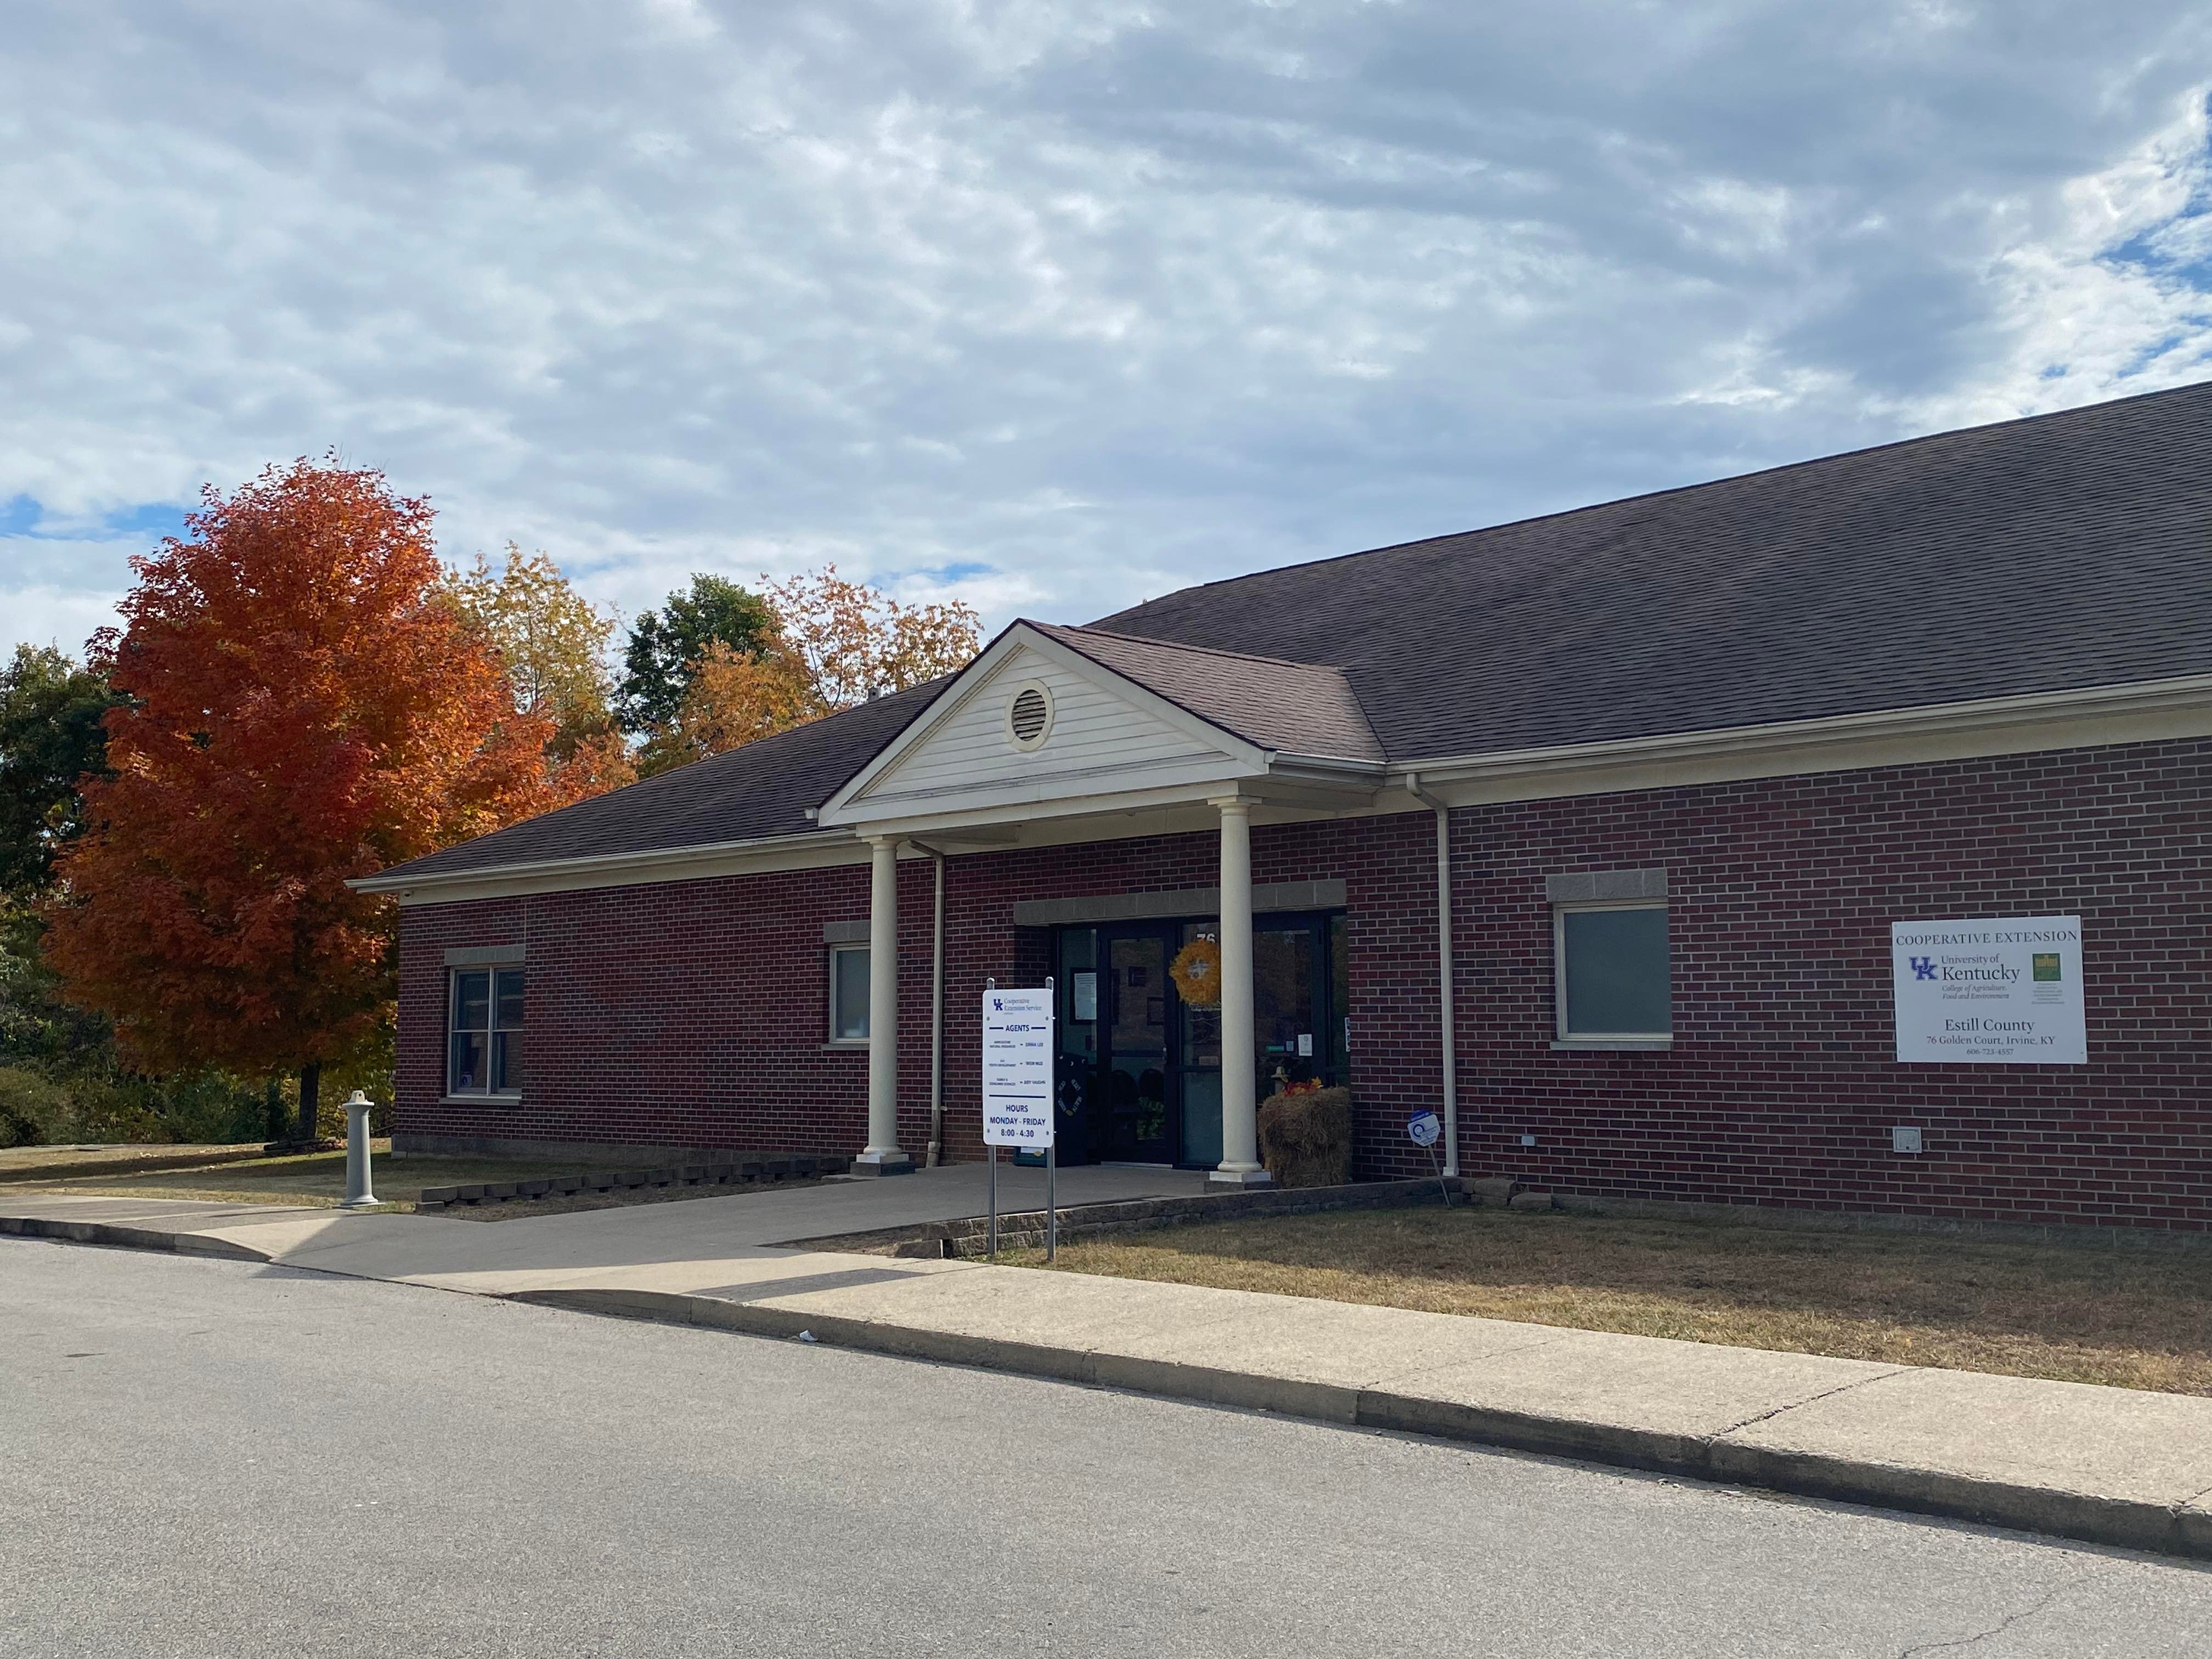 Entrance to the Estill County Extension Office